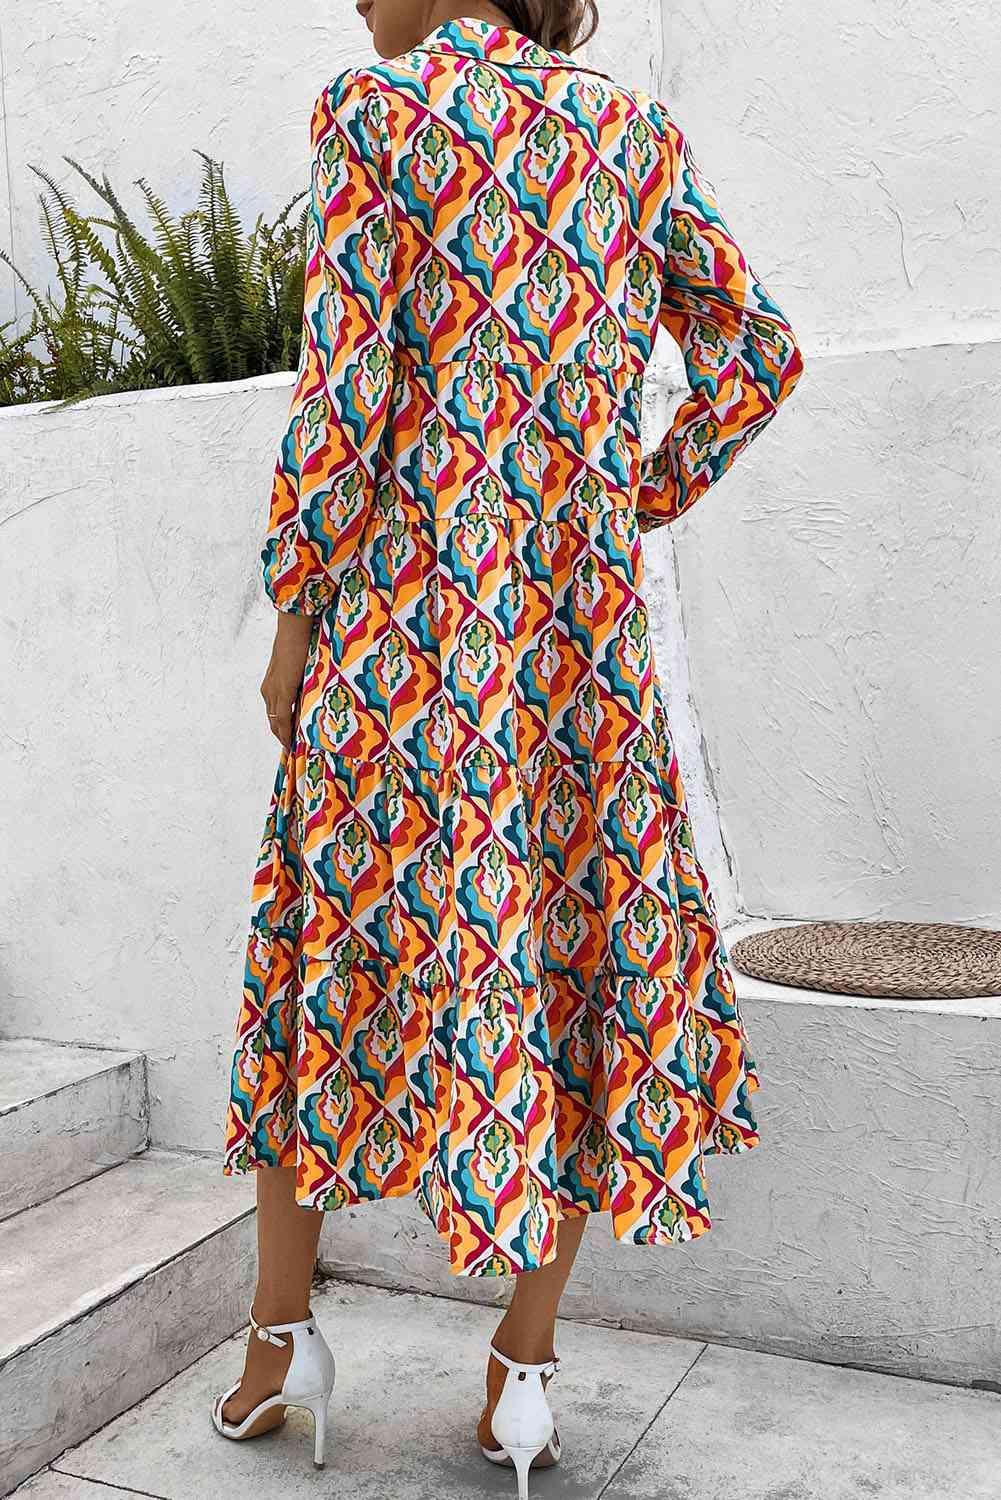 a woman standing on a sidewalk wearing a colorful dress